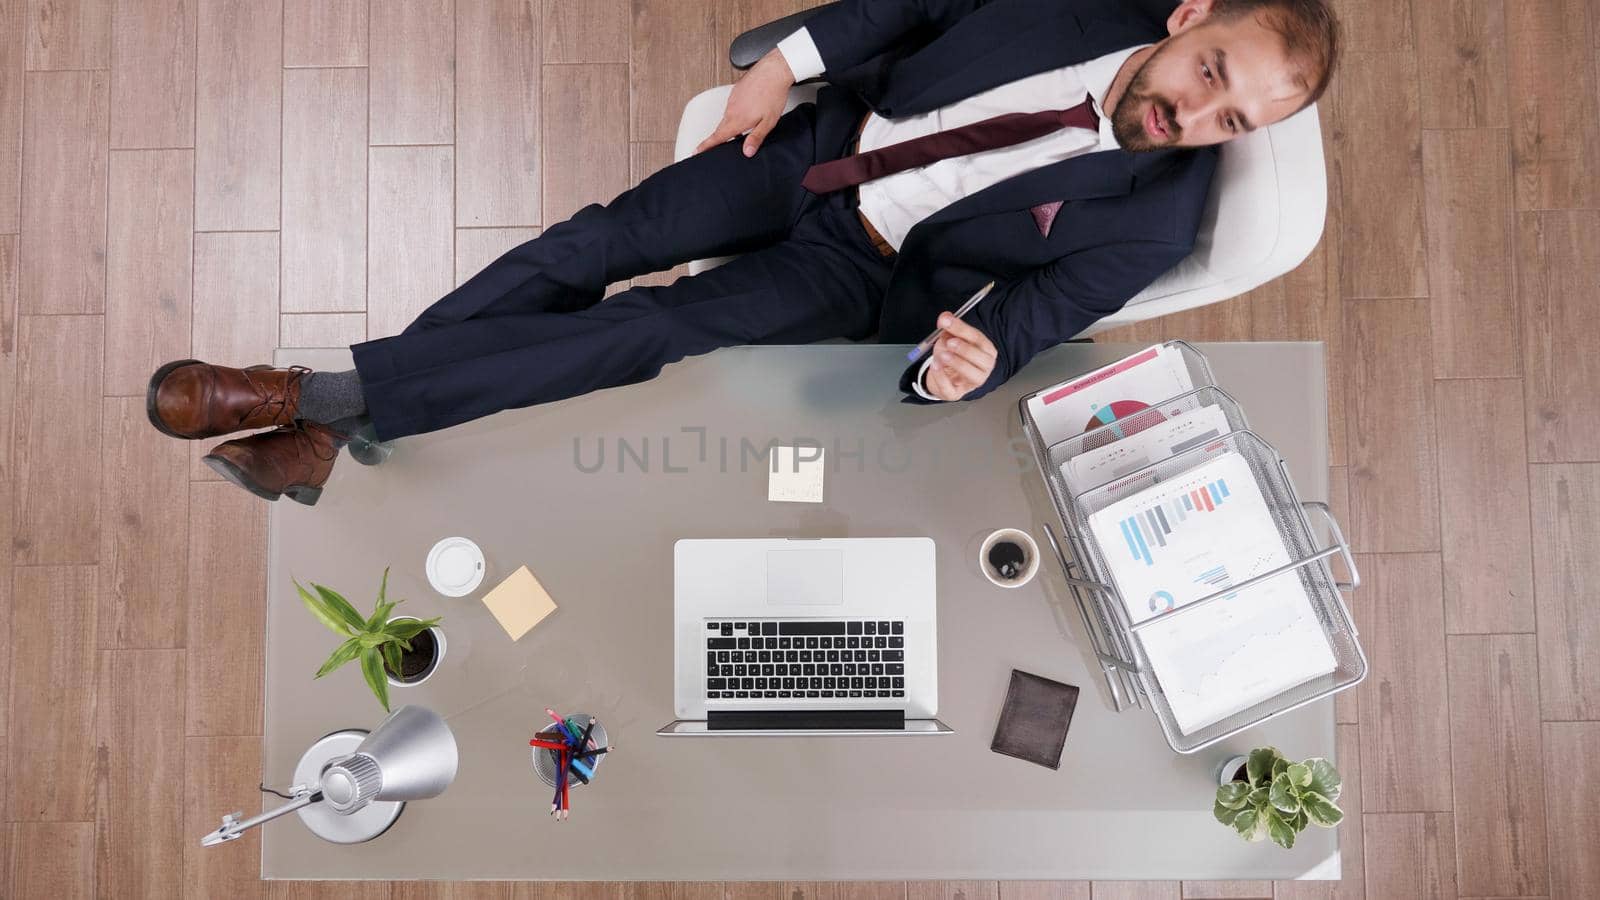 Top view of successful businessman in suit standing with his feet on the desk brainstorming company investments ideas. Executive manager working at business strategy in startup corporate office